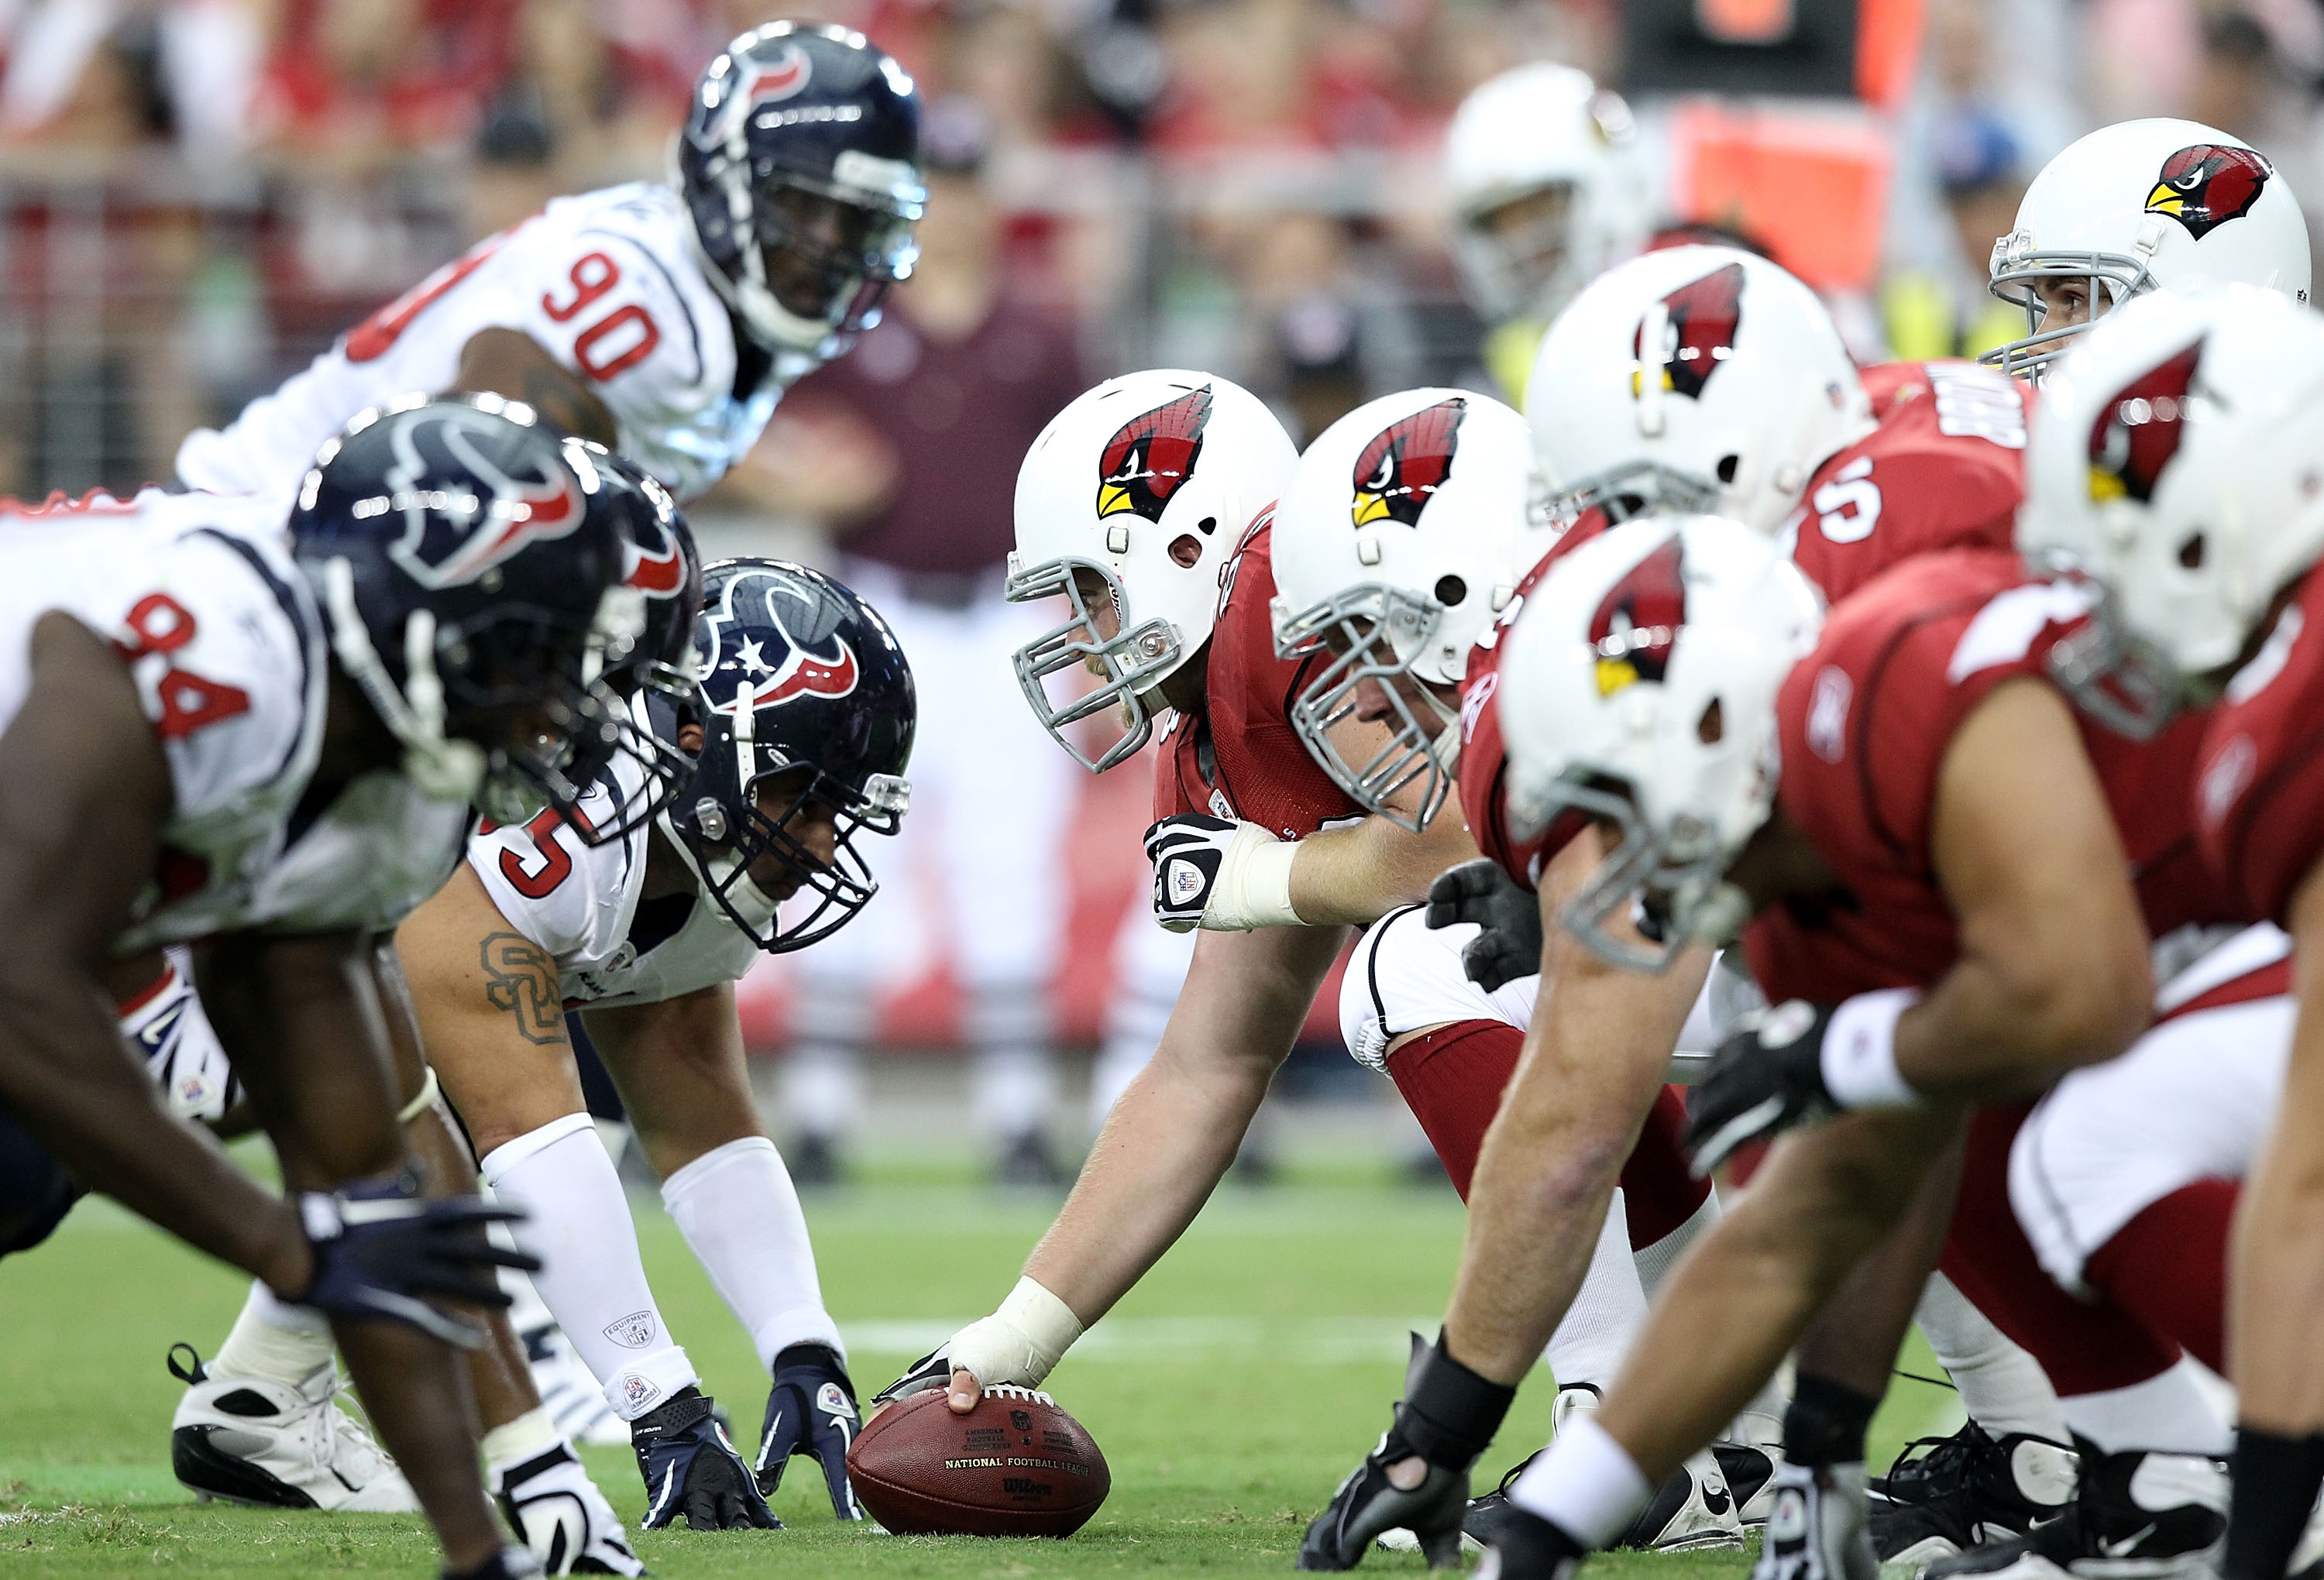 GLENDALE, AZ - AUGUST 14:  Center Lyle Sendlein #63 of the Arizona Cardinals prepares to snap the ball during preseason NFL game against the Houston Texans at the University of Phoenix Stadium on August 14, 2010 in Glendale, Arizona.  (Photo by Christian